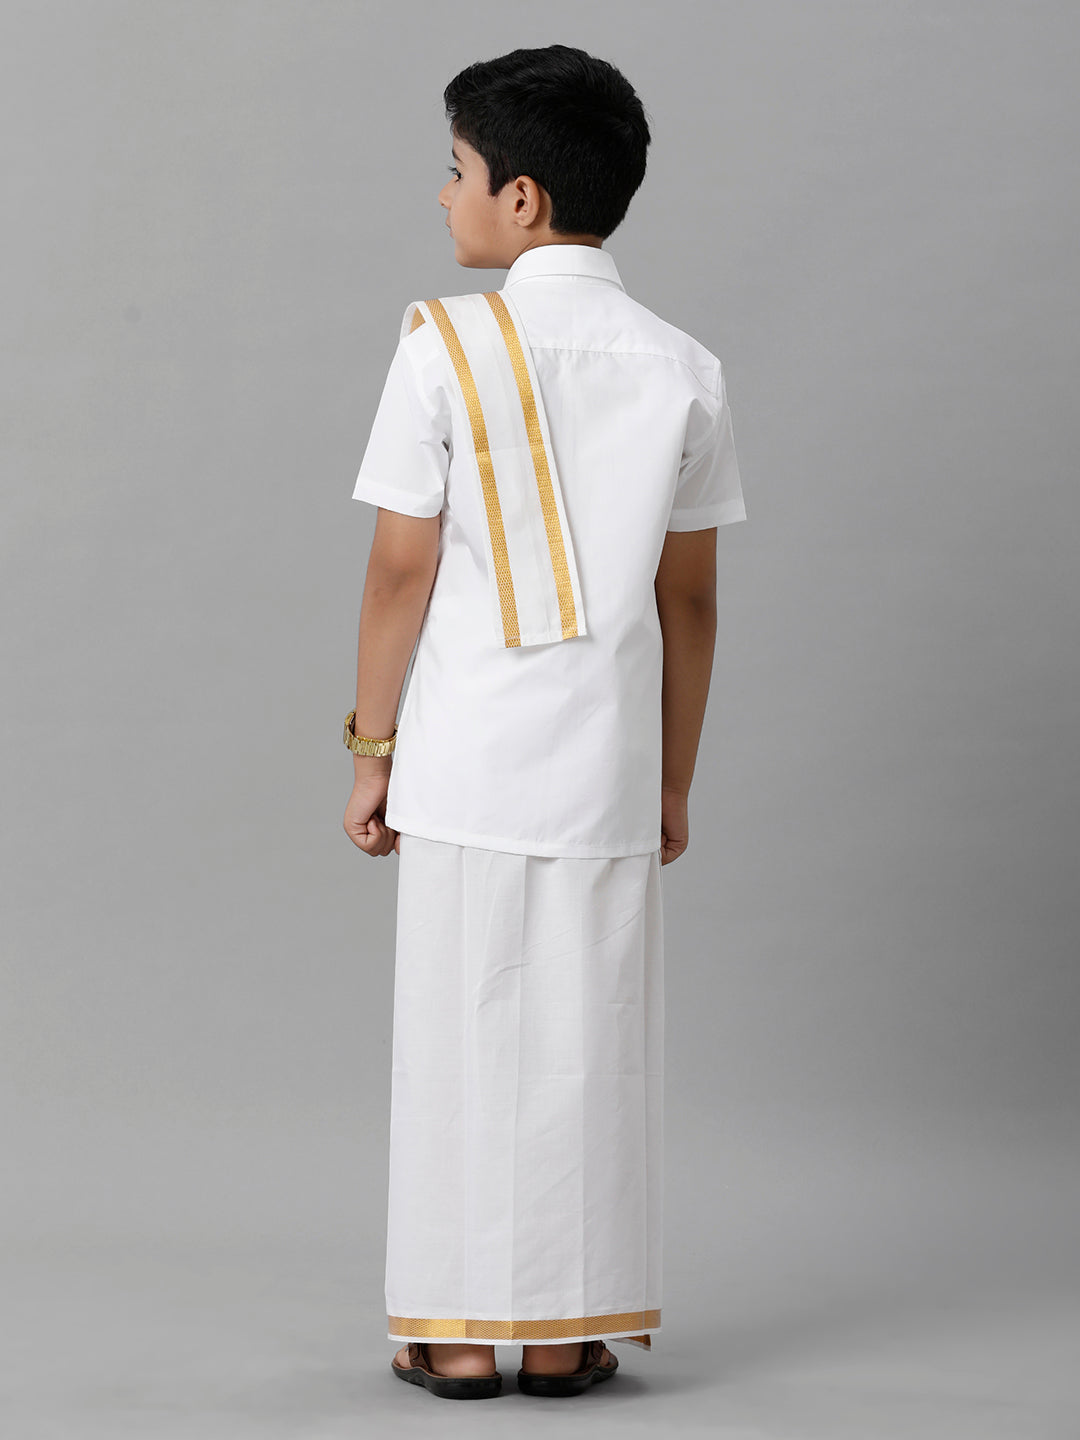 Boys Cotton White Half Sleeves Shirt Dhoti with Towel Set-Back view